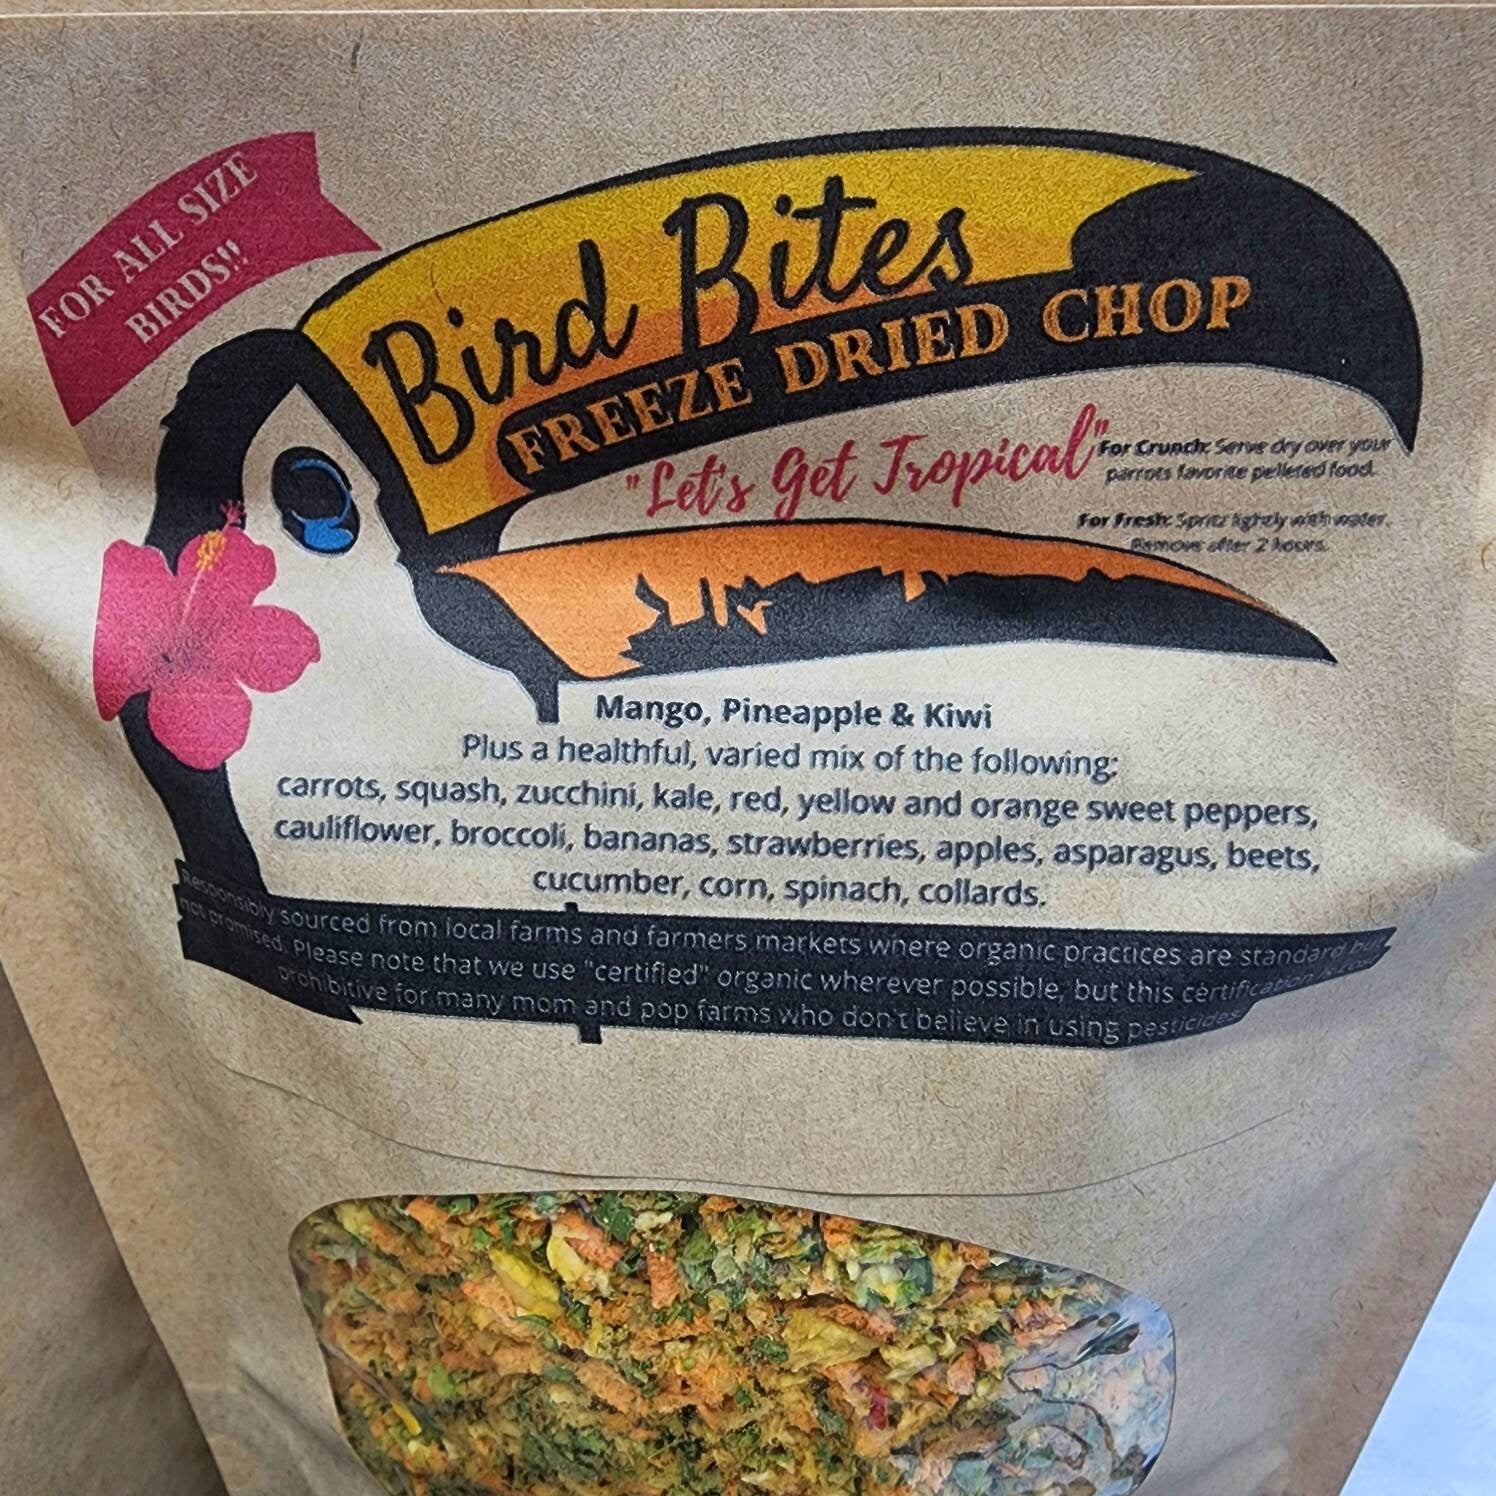 Bird Bites Freeze Dried Chop - Daily Fruits & Veggies, 3 Flavors to Choose From